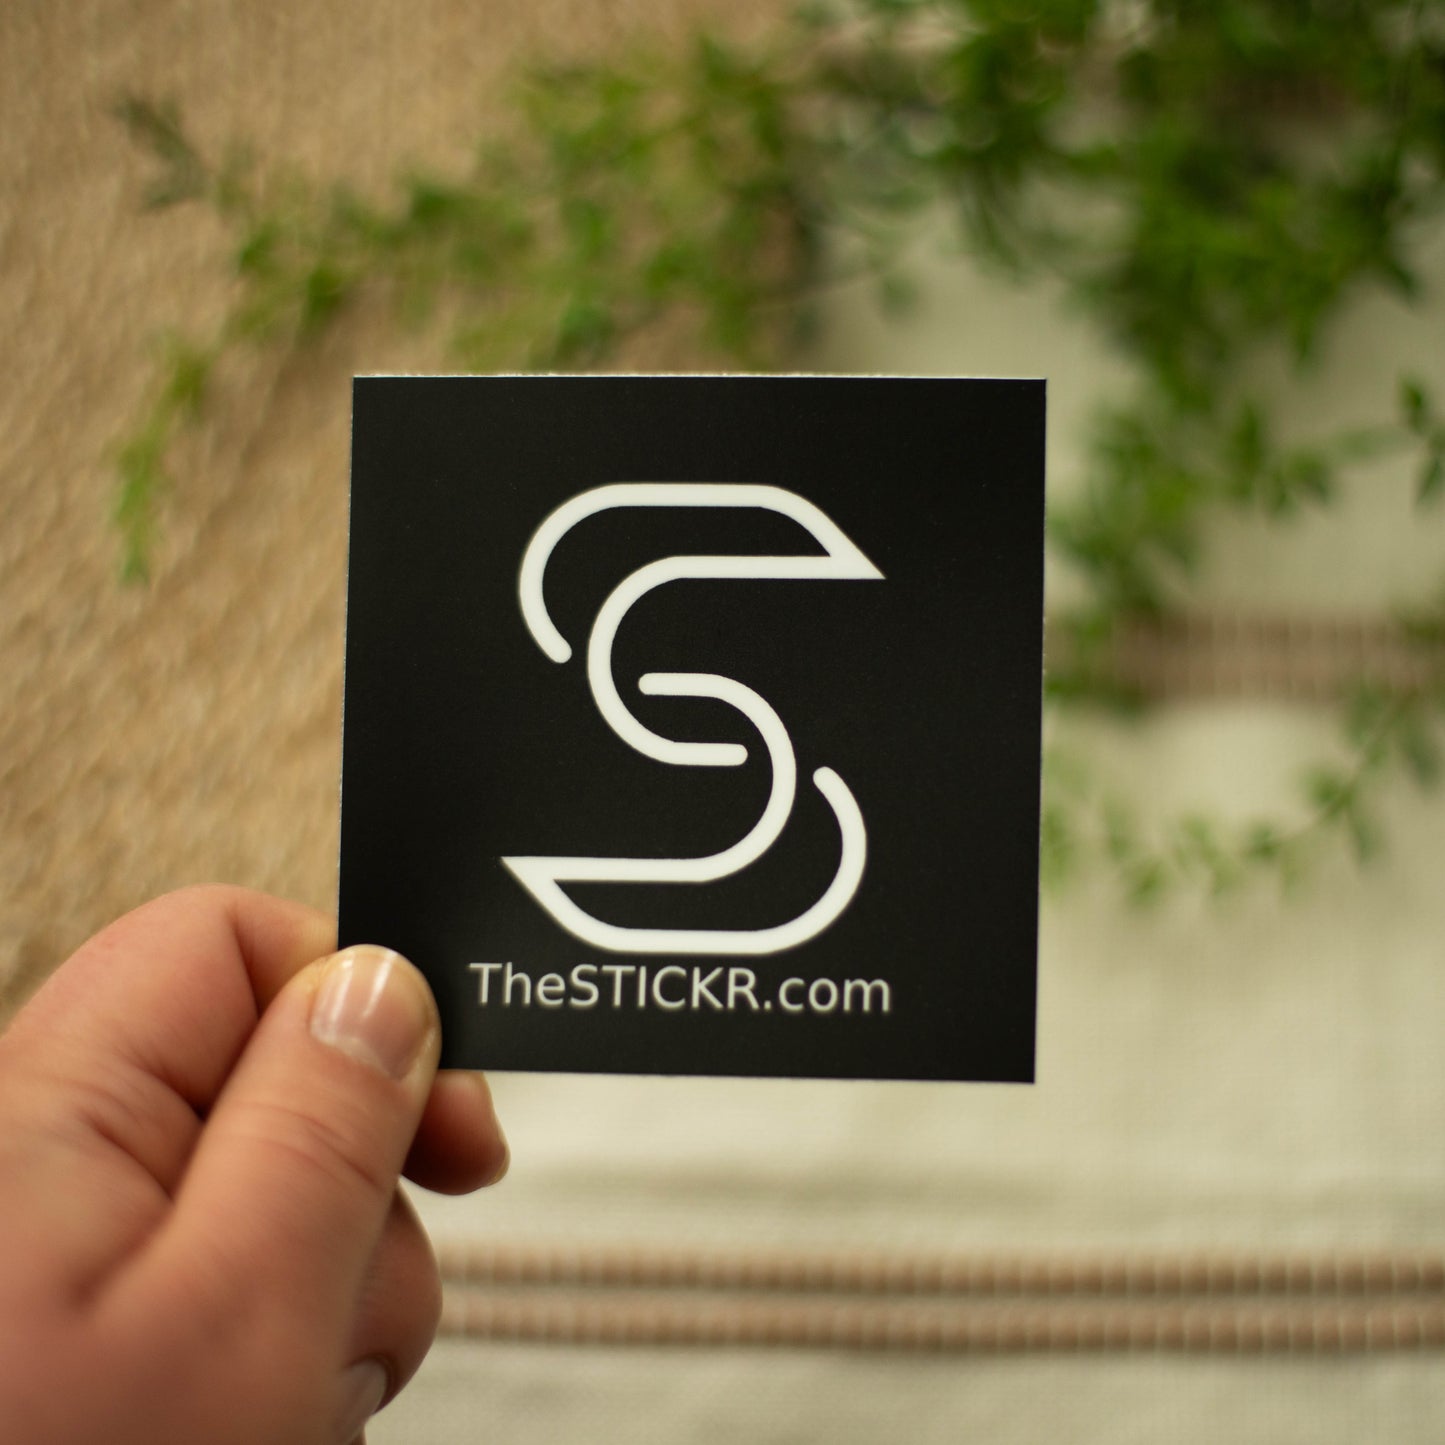 A hand holding a square-shaped vinyl sticker of the Stickr logo and website